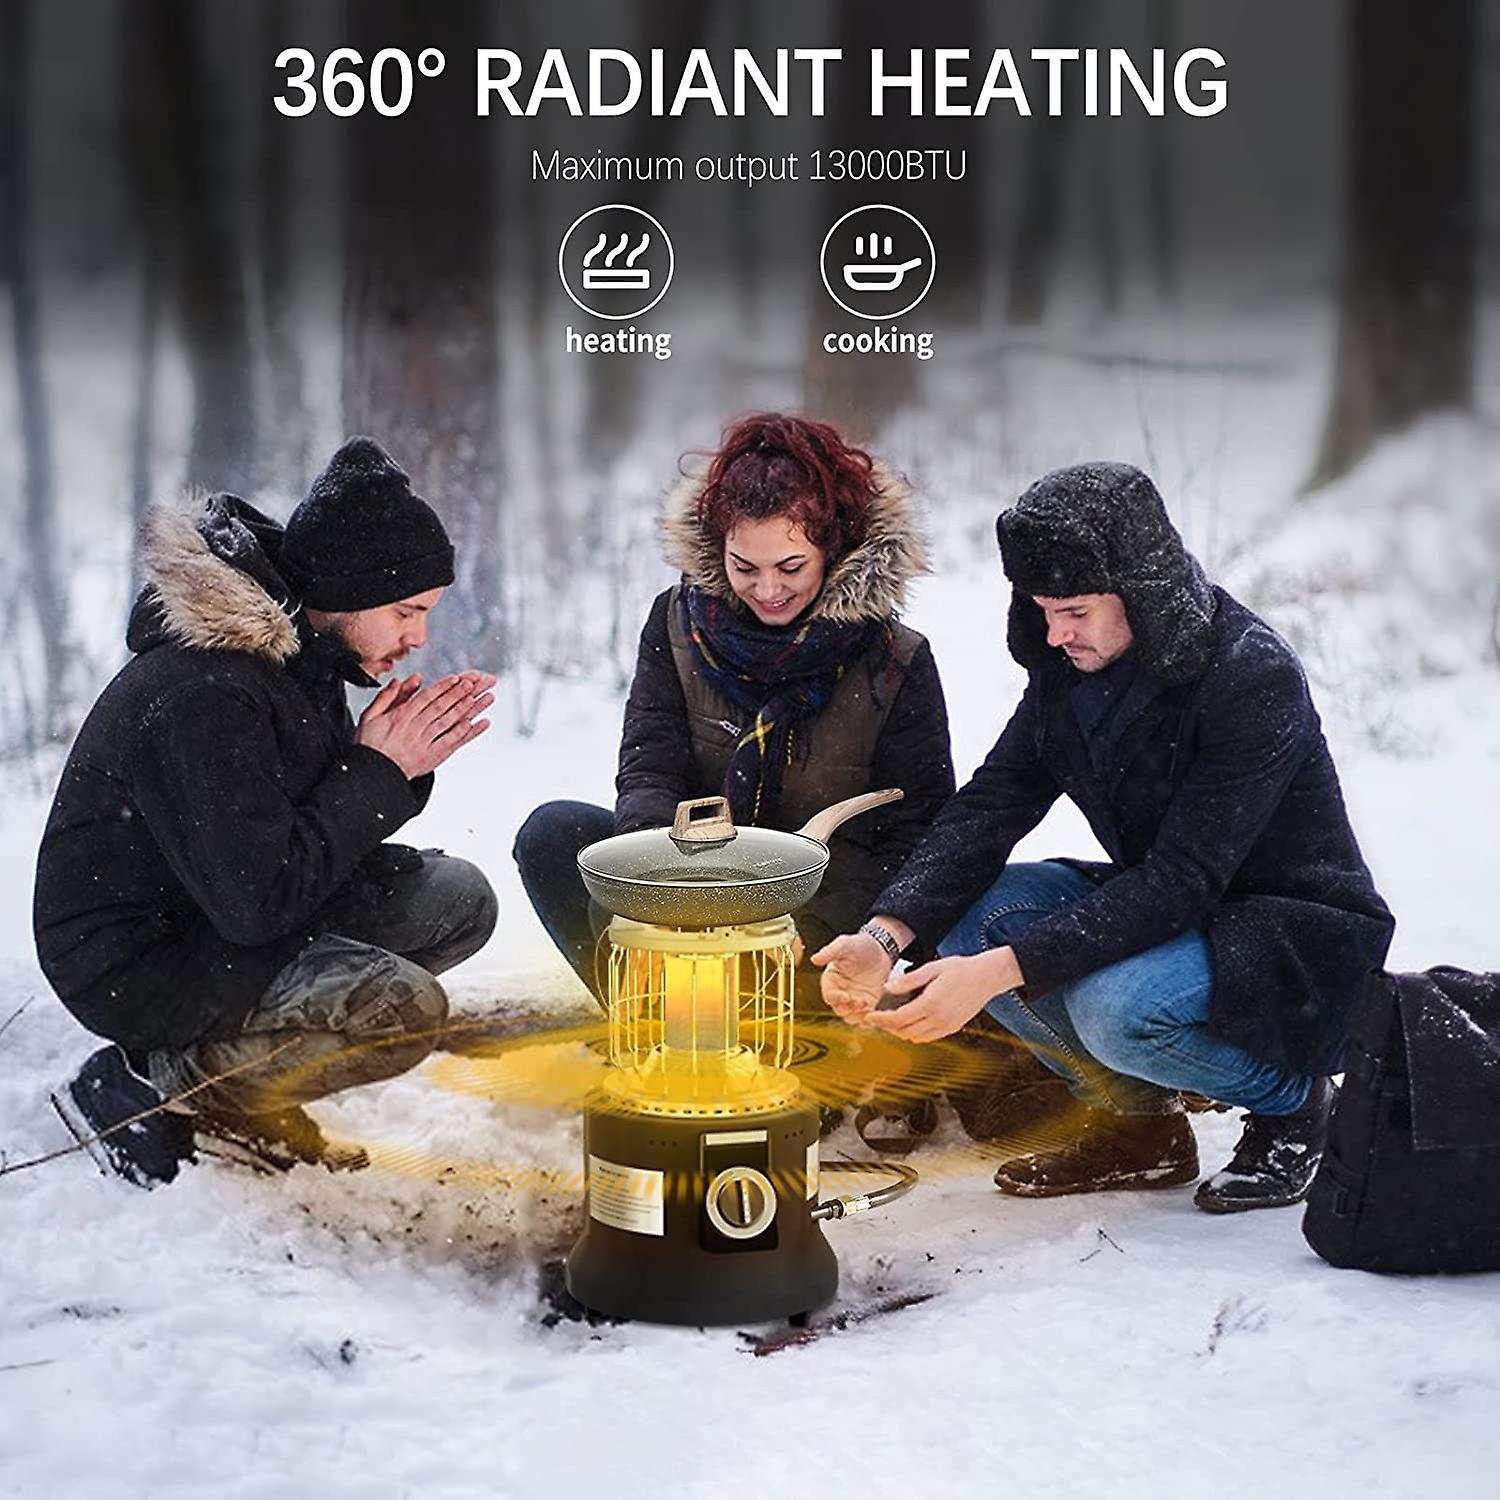 Propane Heater， 2-in-1 Camping Portable Lp Gas Heaterandstove With 5ft Propane Hose + Pressure Reducing Valve， Outdoor Patio Heaters For Tent Ice Fishin